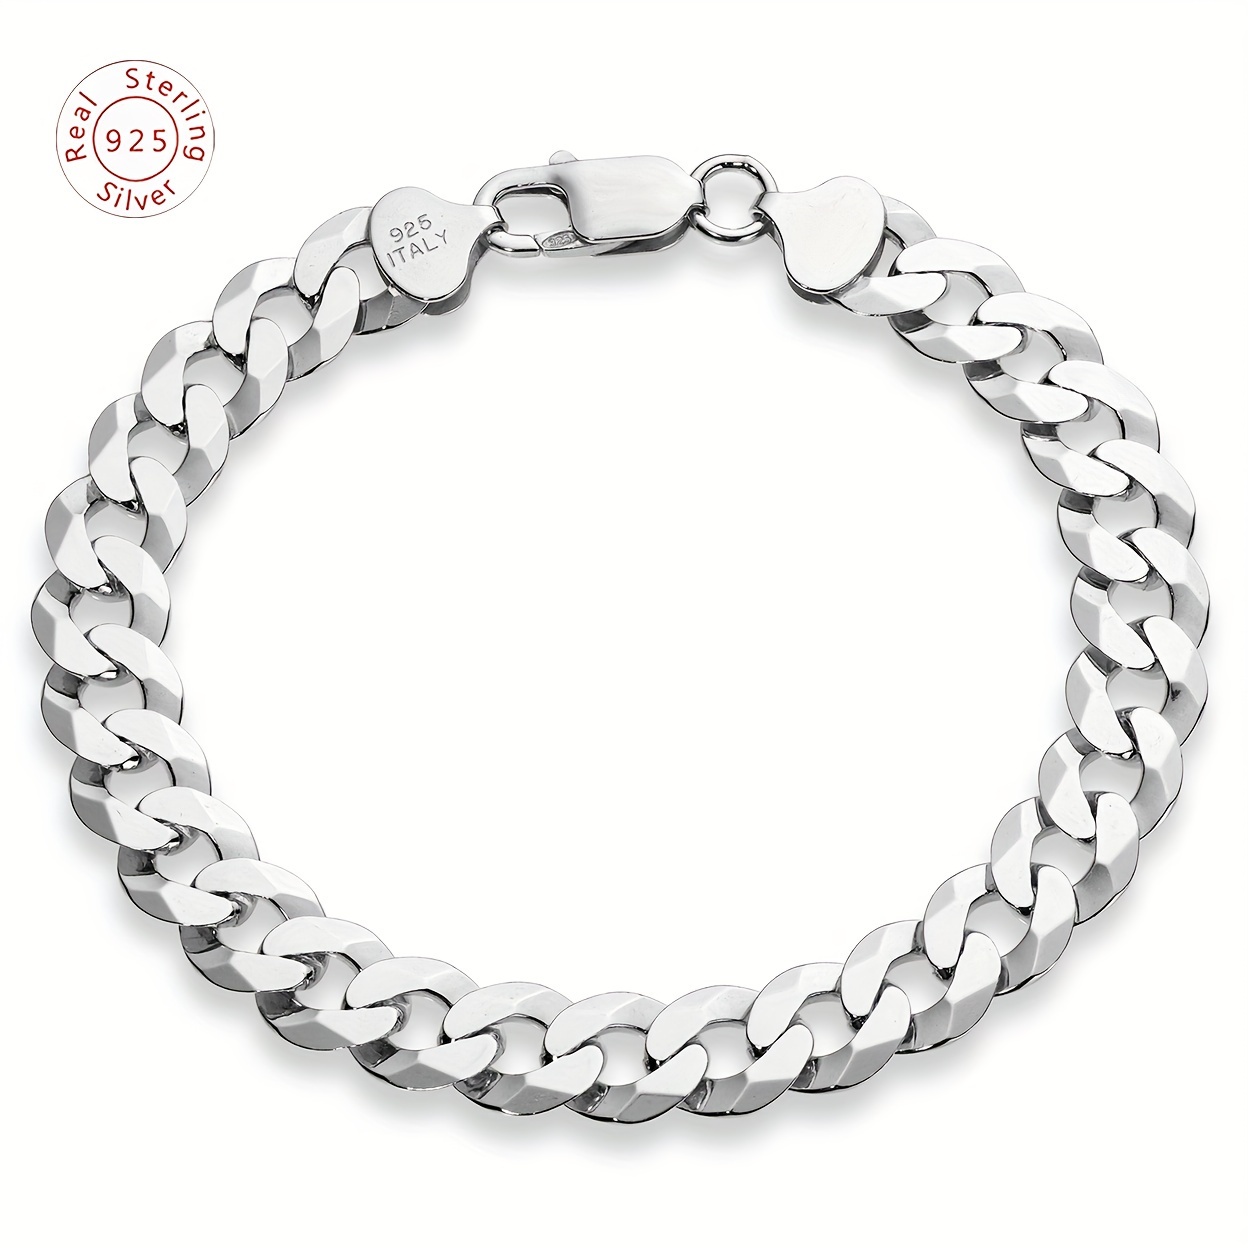 

1pc Snake Design 925 Silver Bracelet Chain Length 7.5in Luxury High Quality Personalized Retro Street Hip Hop Holiday Gift Birthday Gift With A Beautiful Gift Box